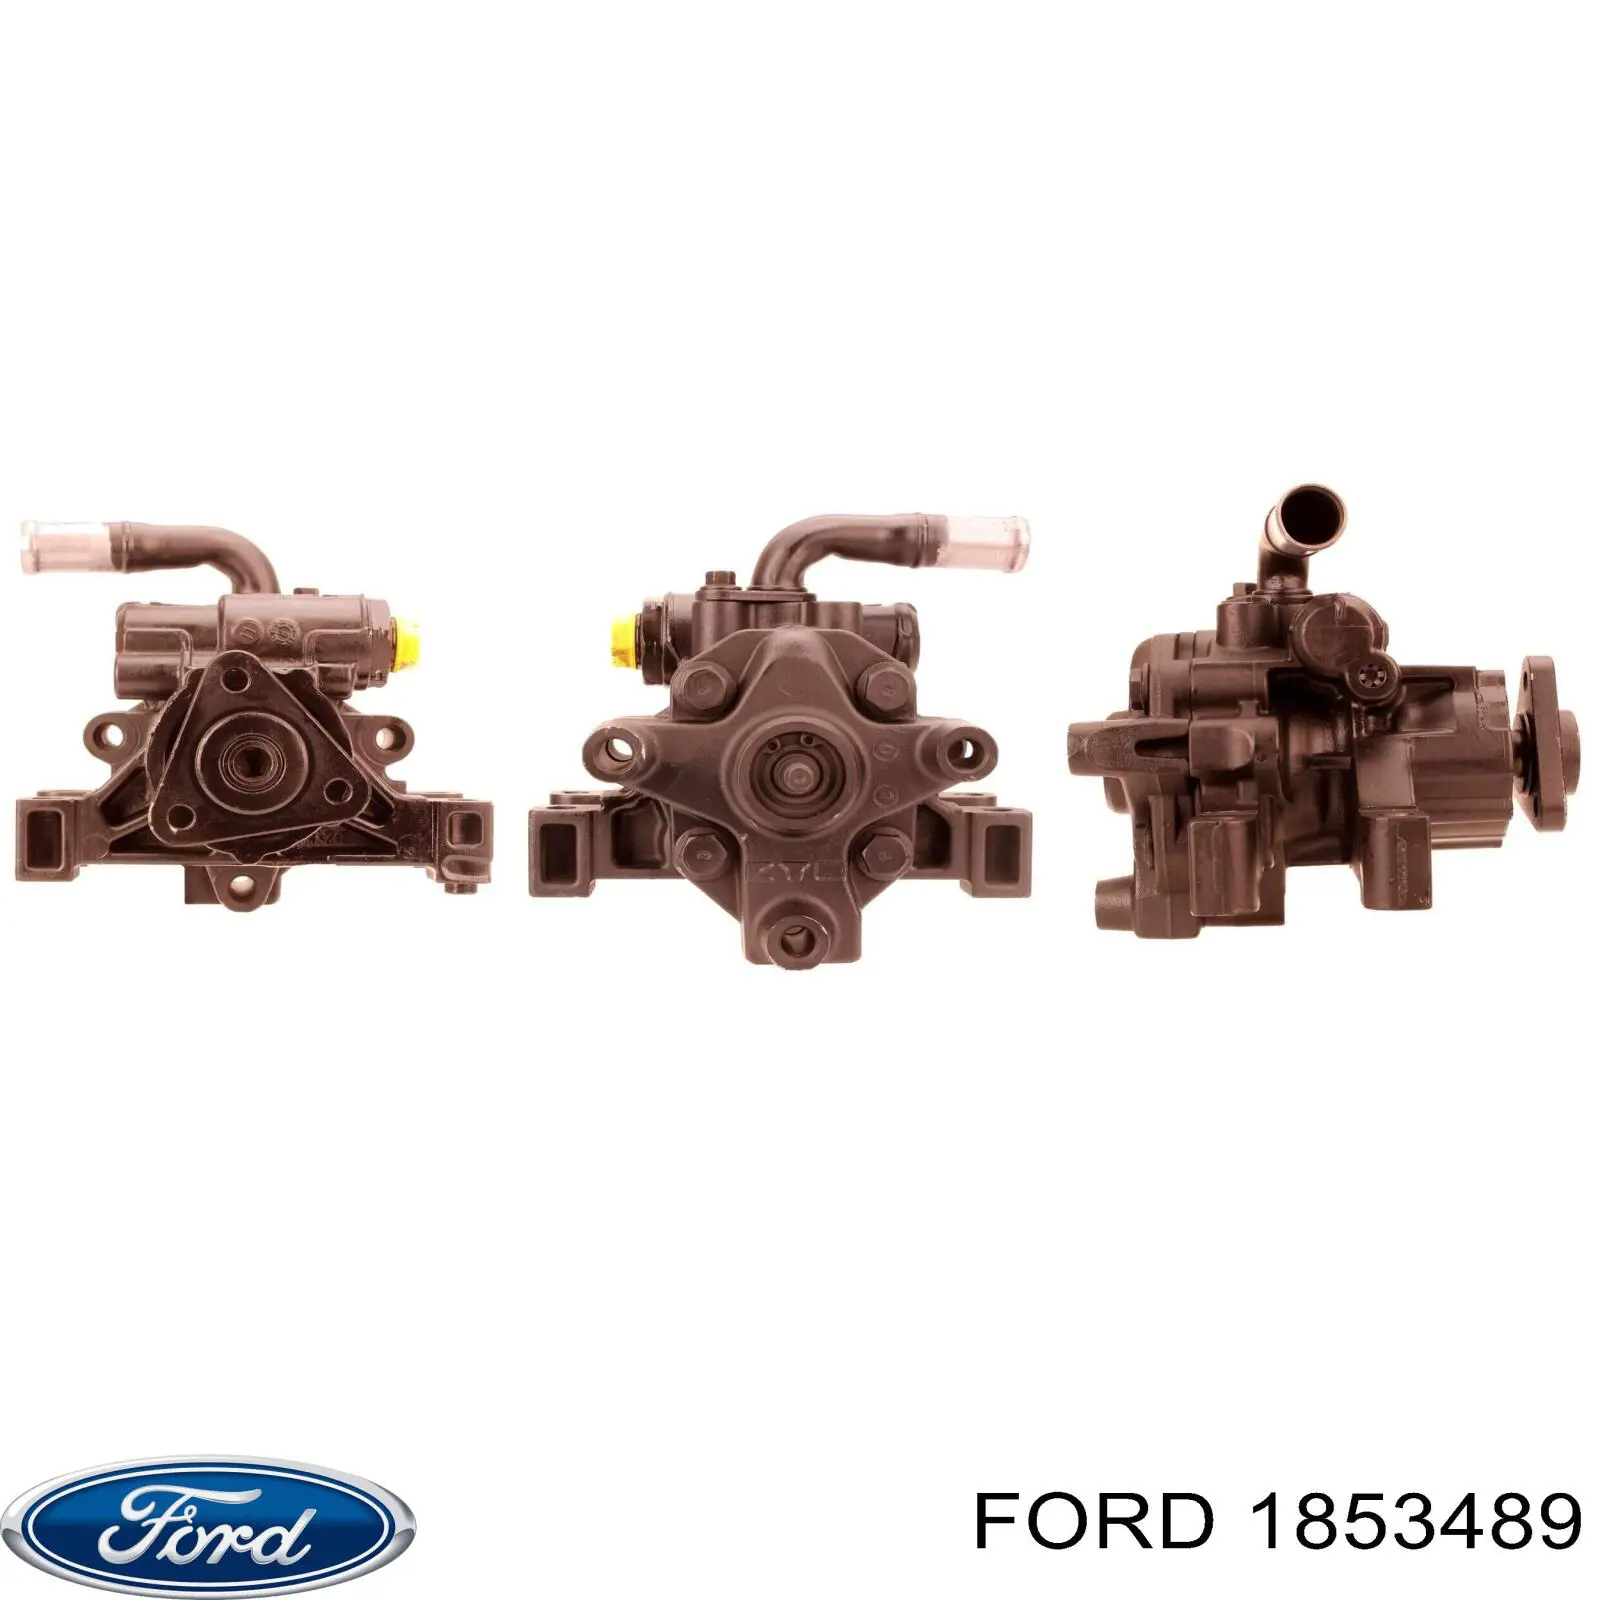 1853489 Ford насос гур